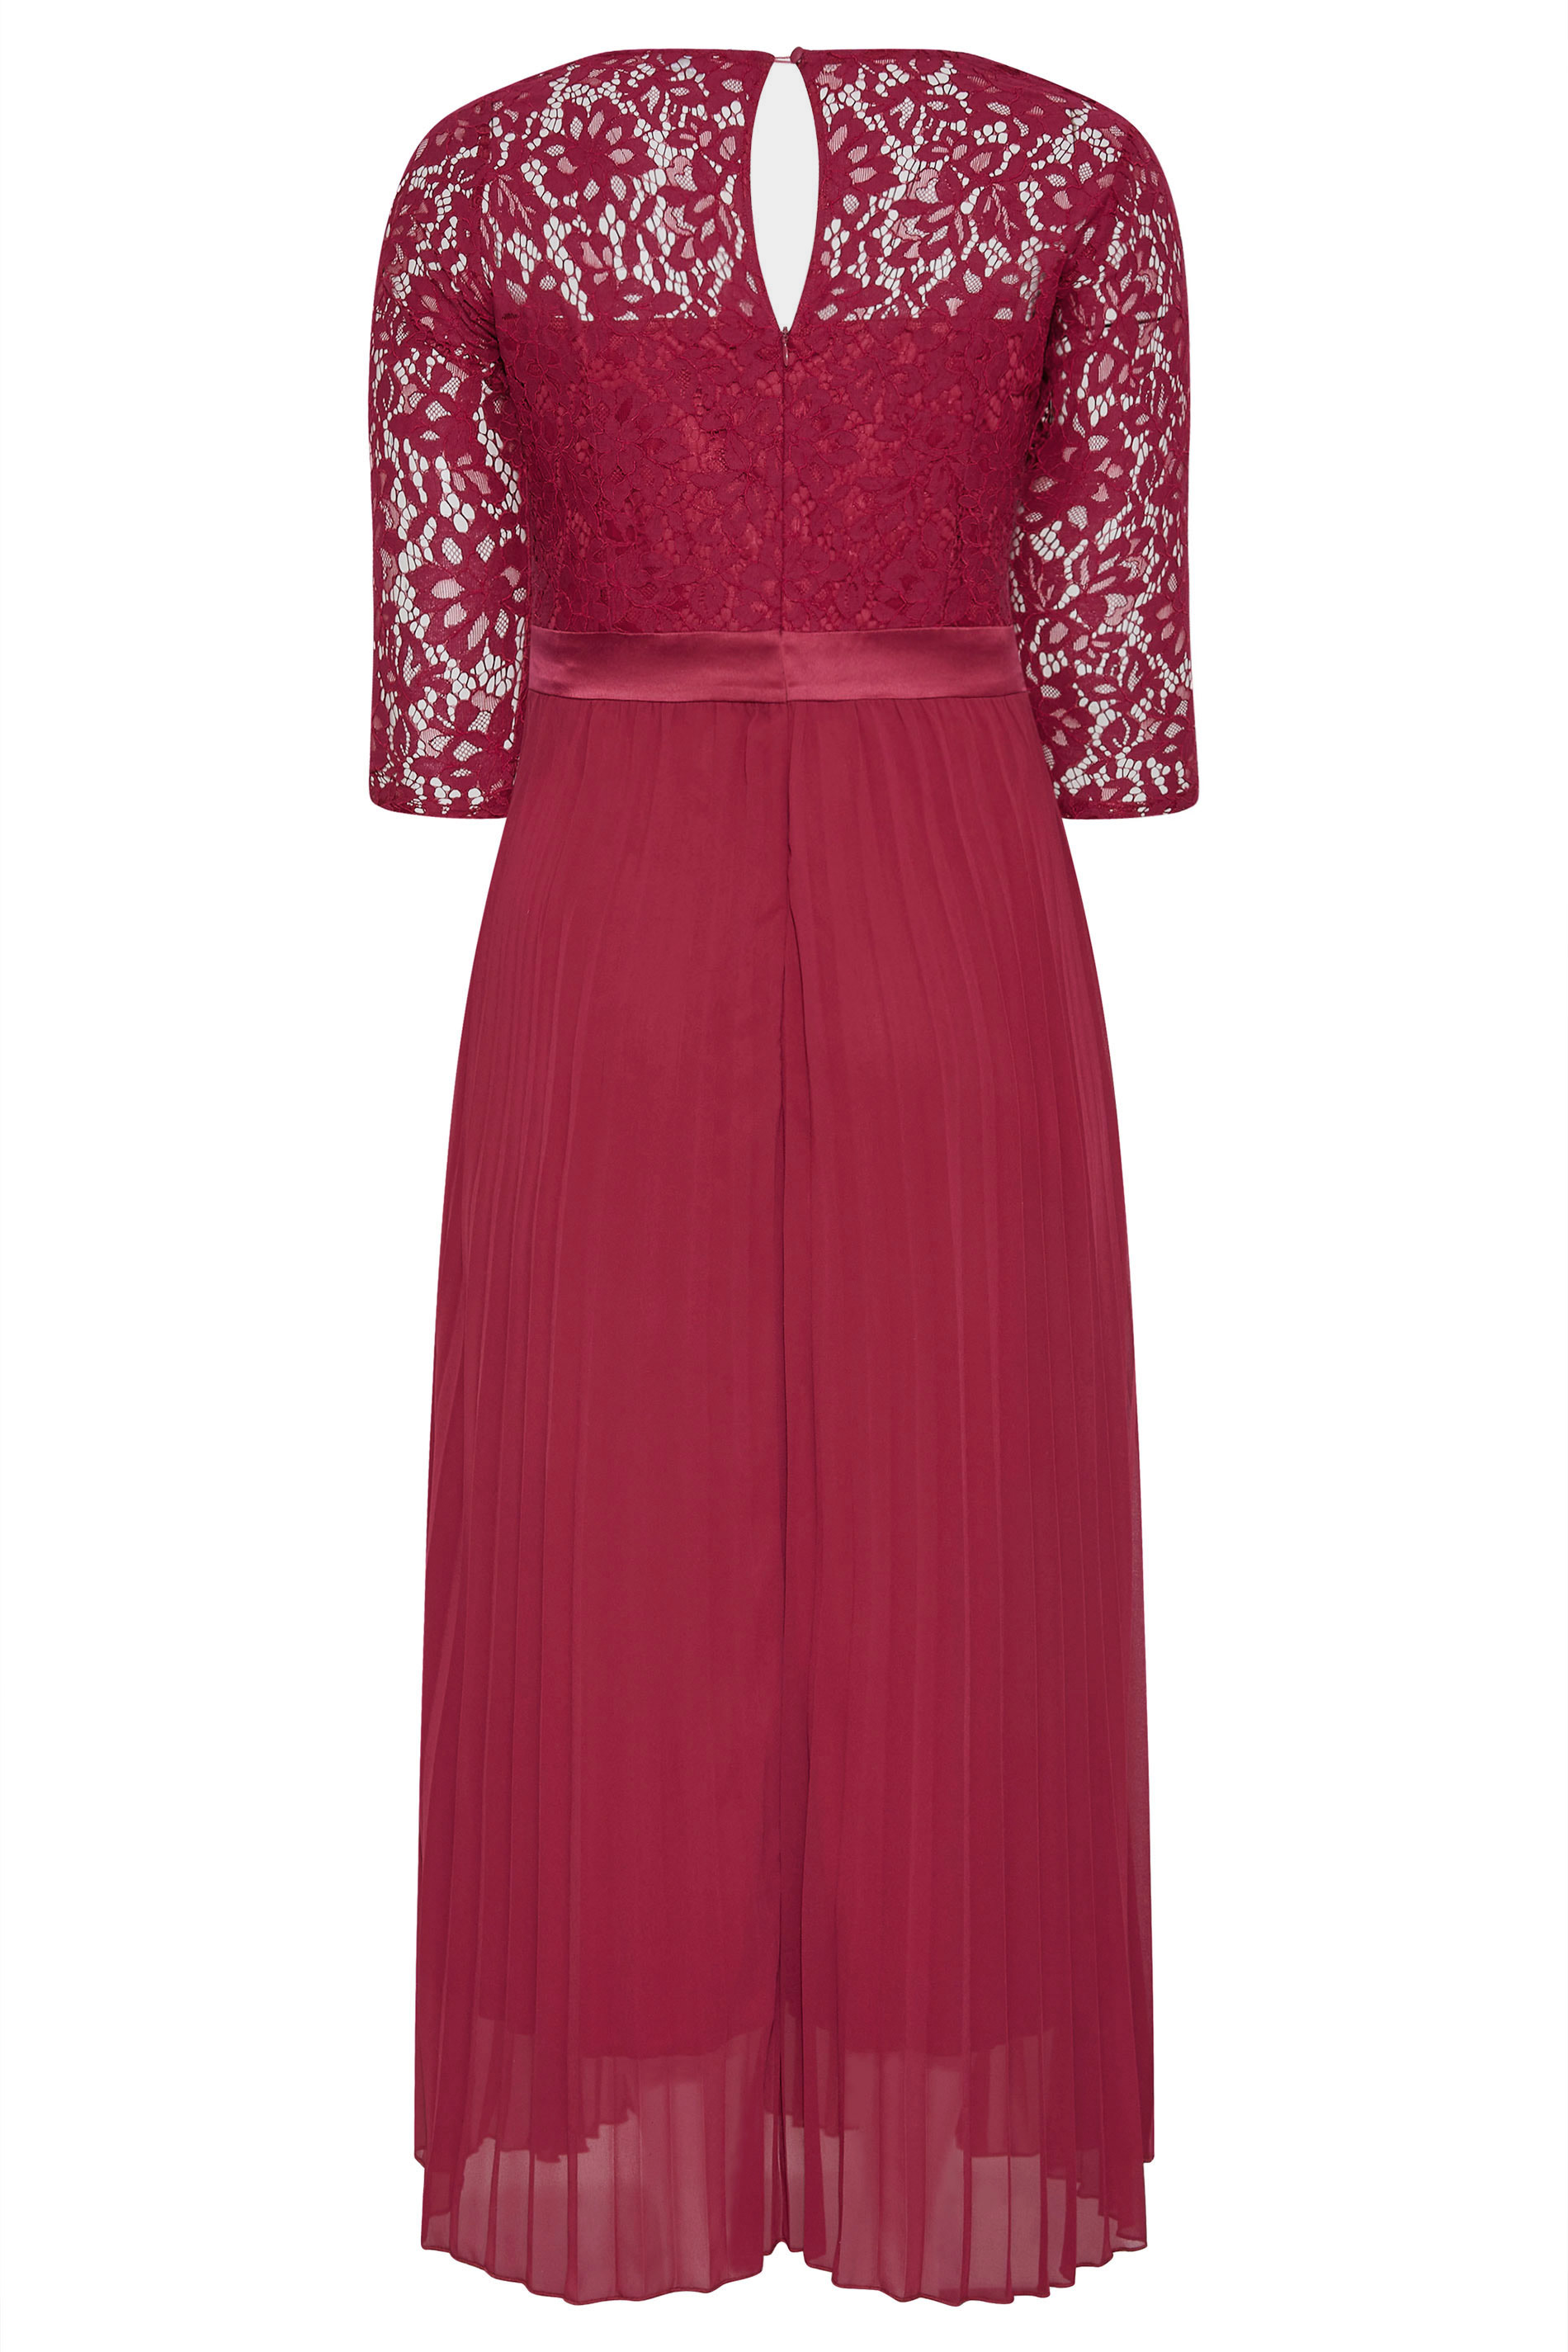 YOURS Plus Size Burgundy Red Lace Sequin Embellished Swing Dress